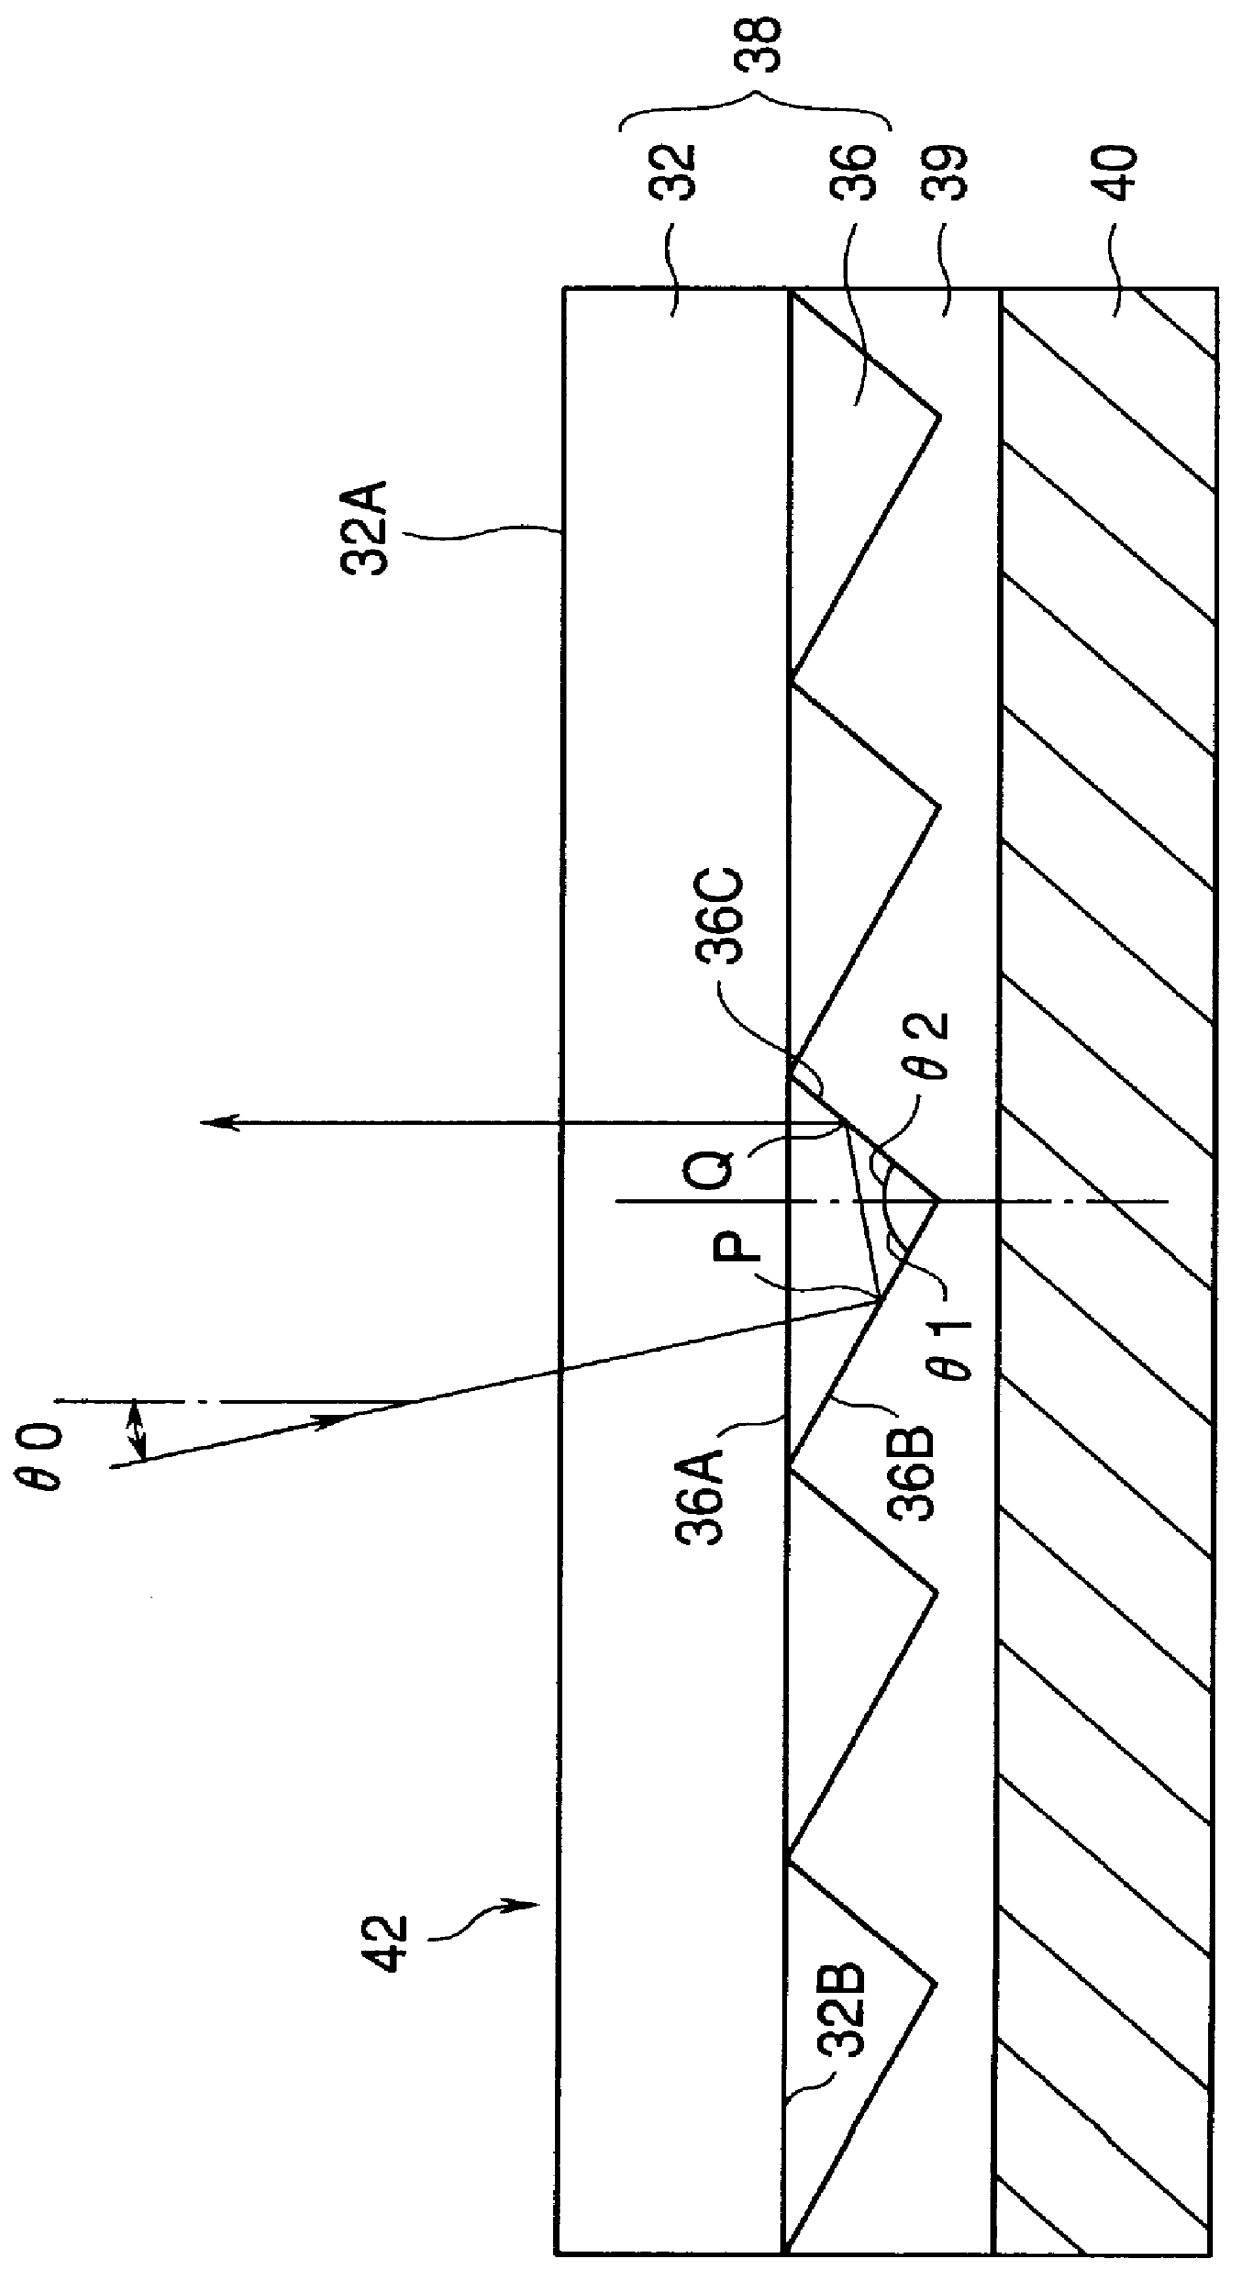 Light reflector for use in a reflective-type liquid-crystal display